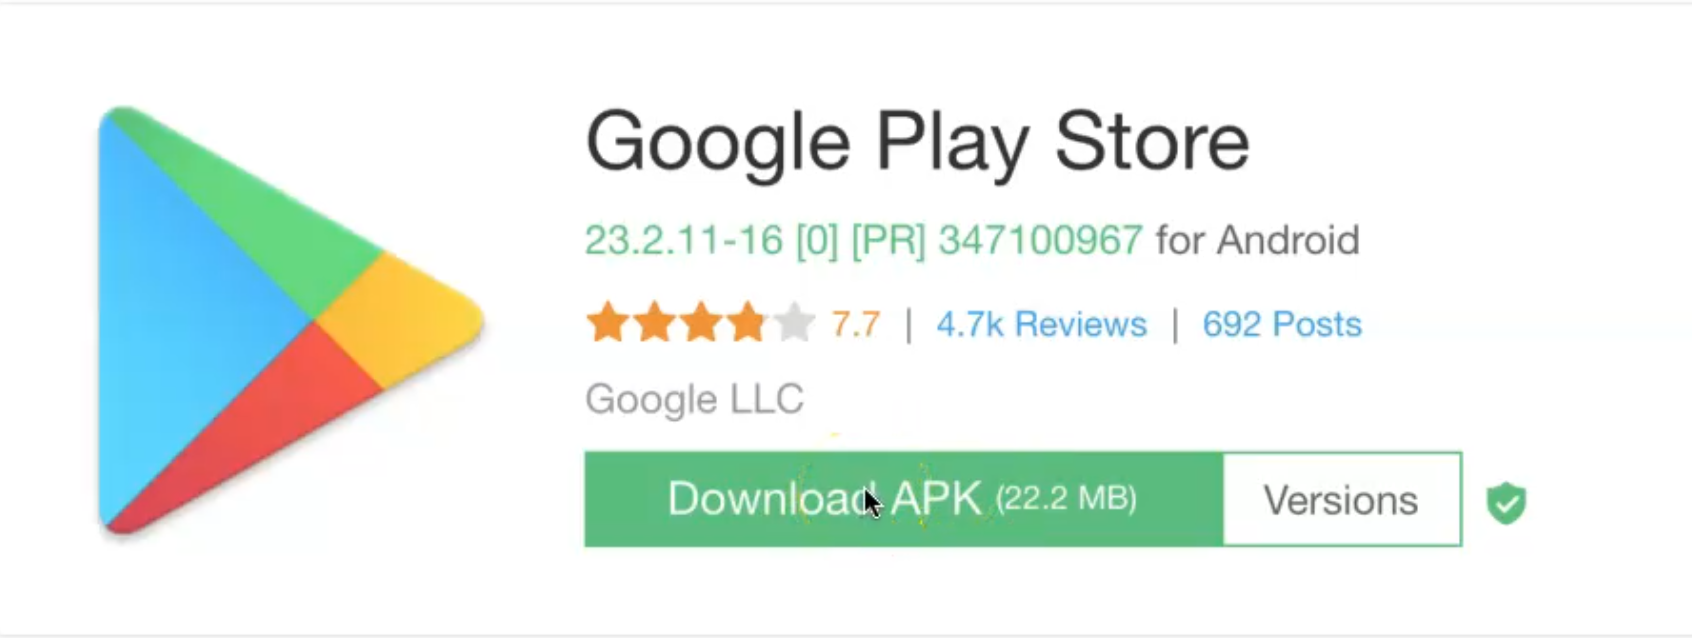 Play store русский язык. Google Play. Google Play Store. Google Play Маркет. Android Play Store.